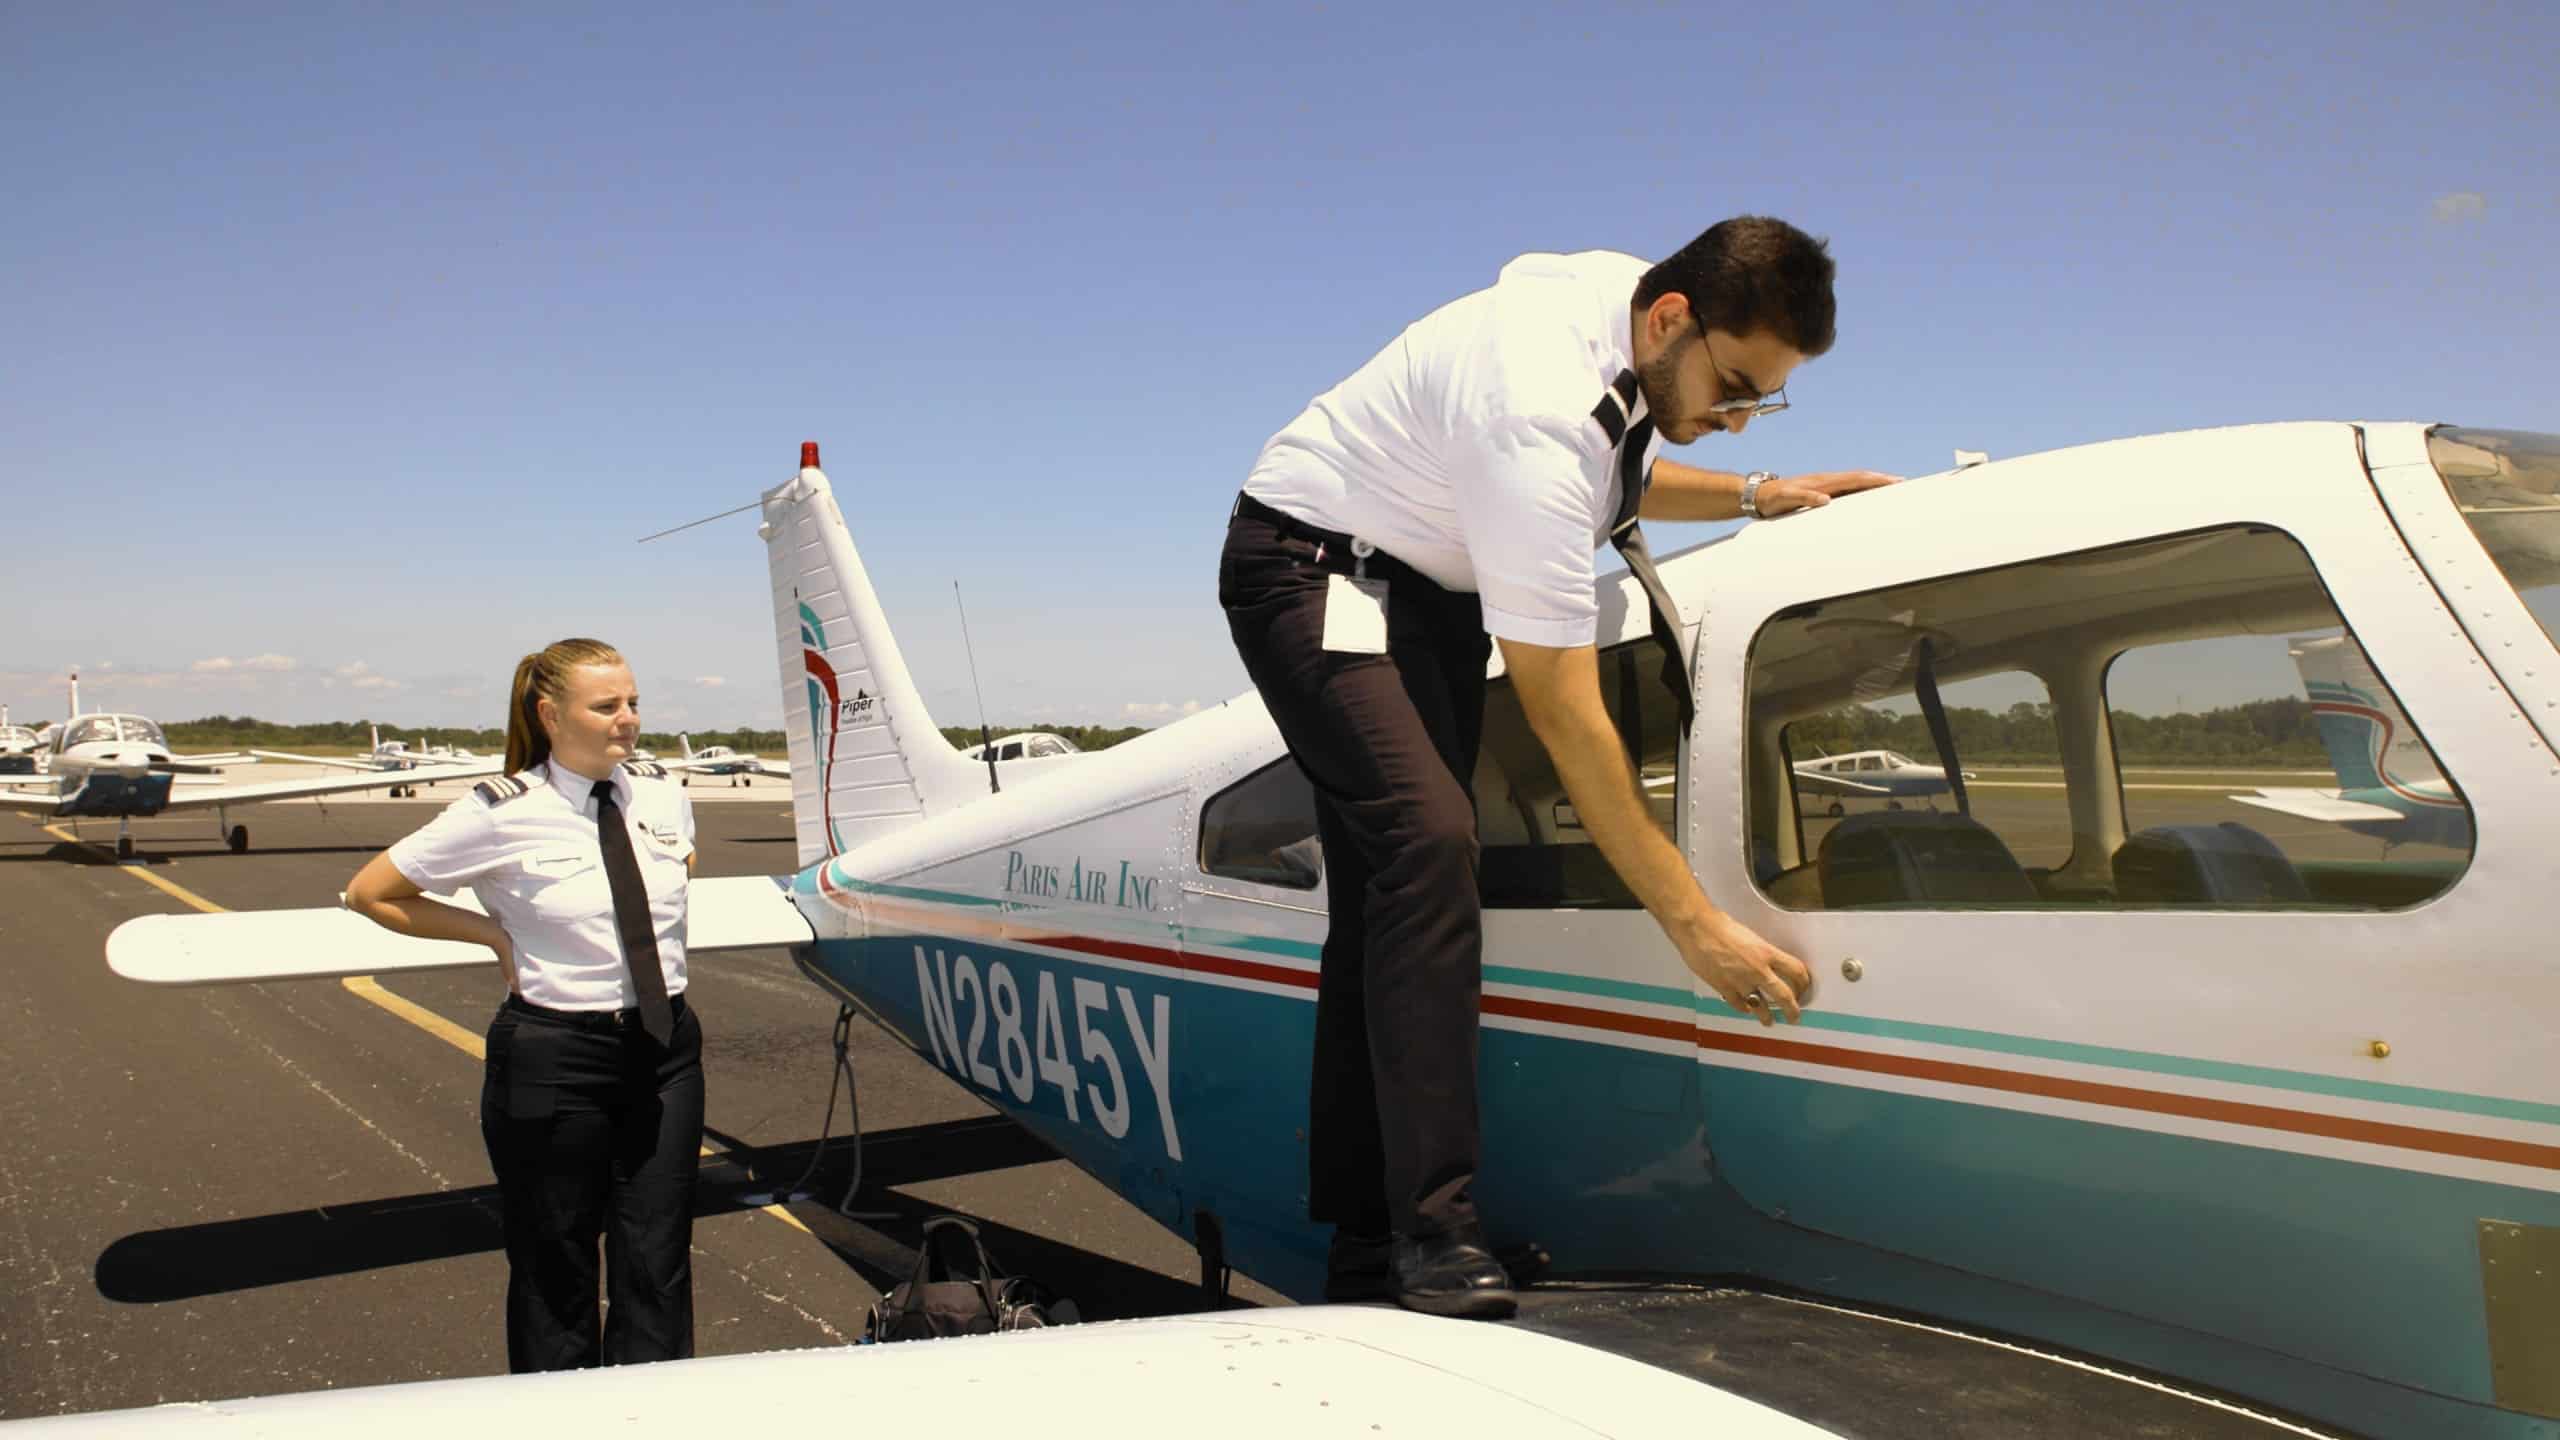 Paris Air students inspect a small airplane